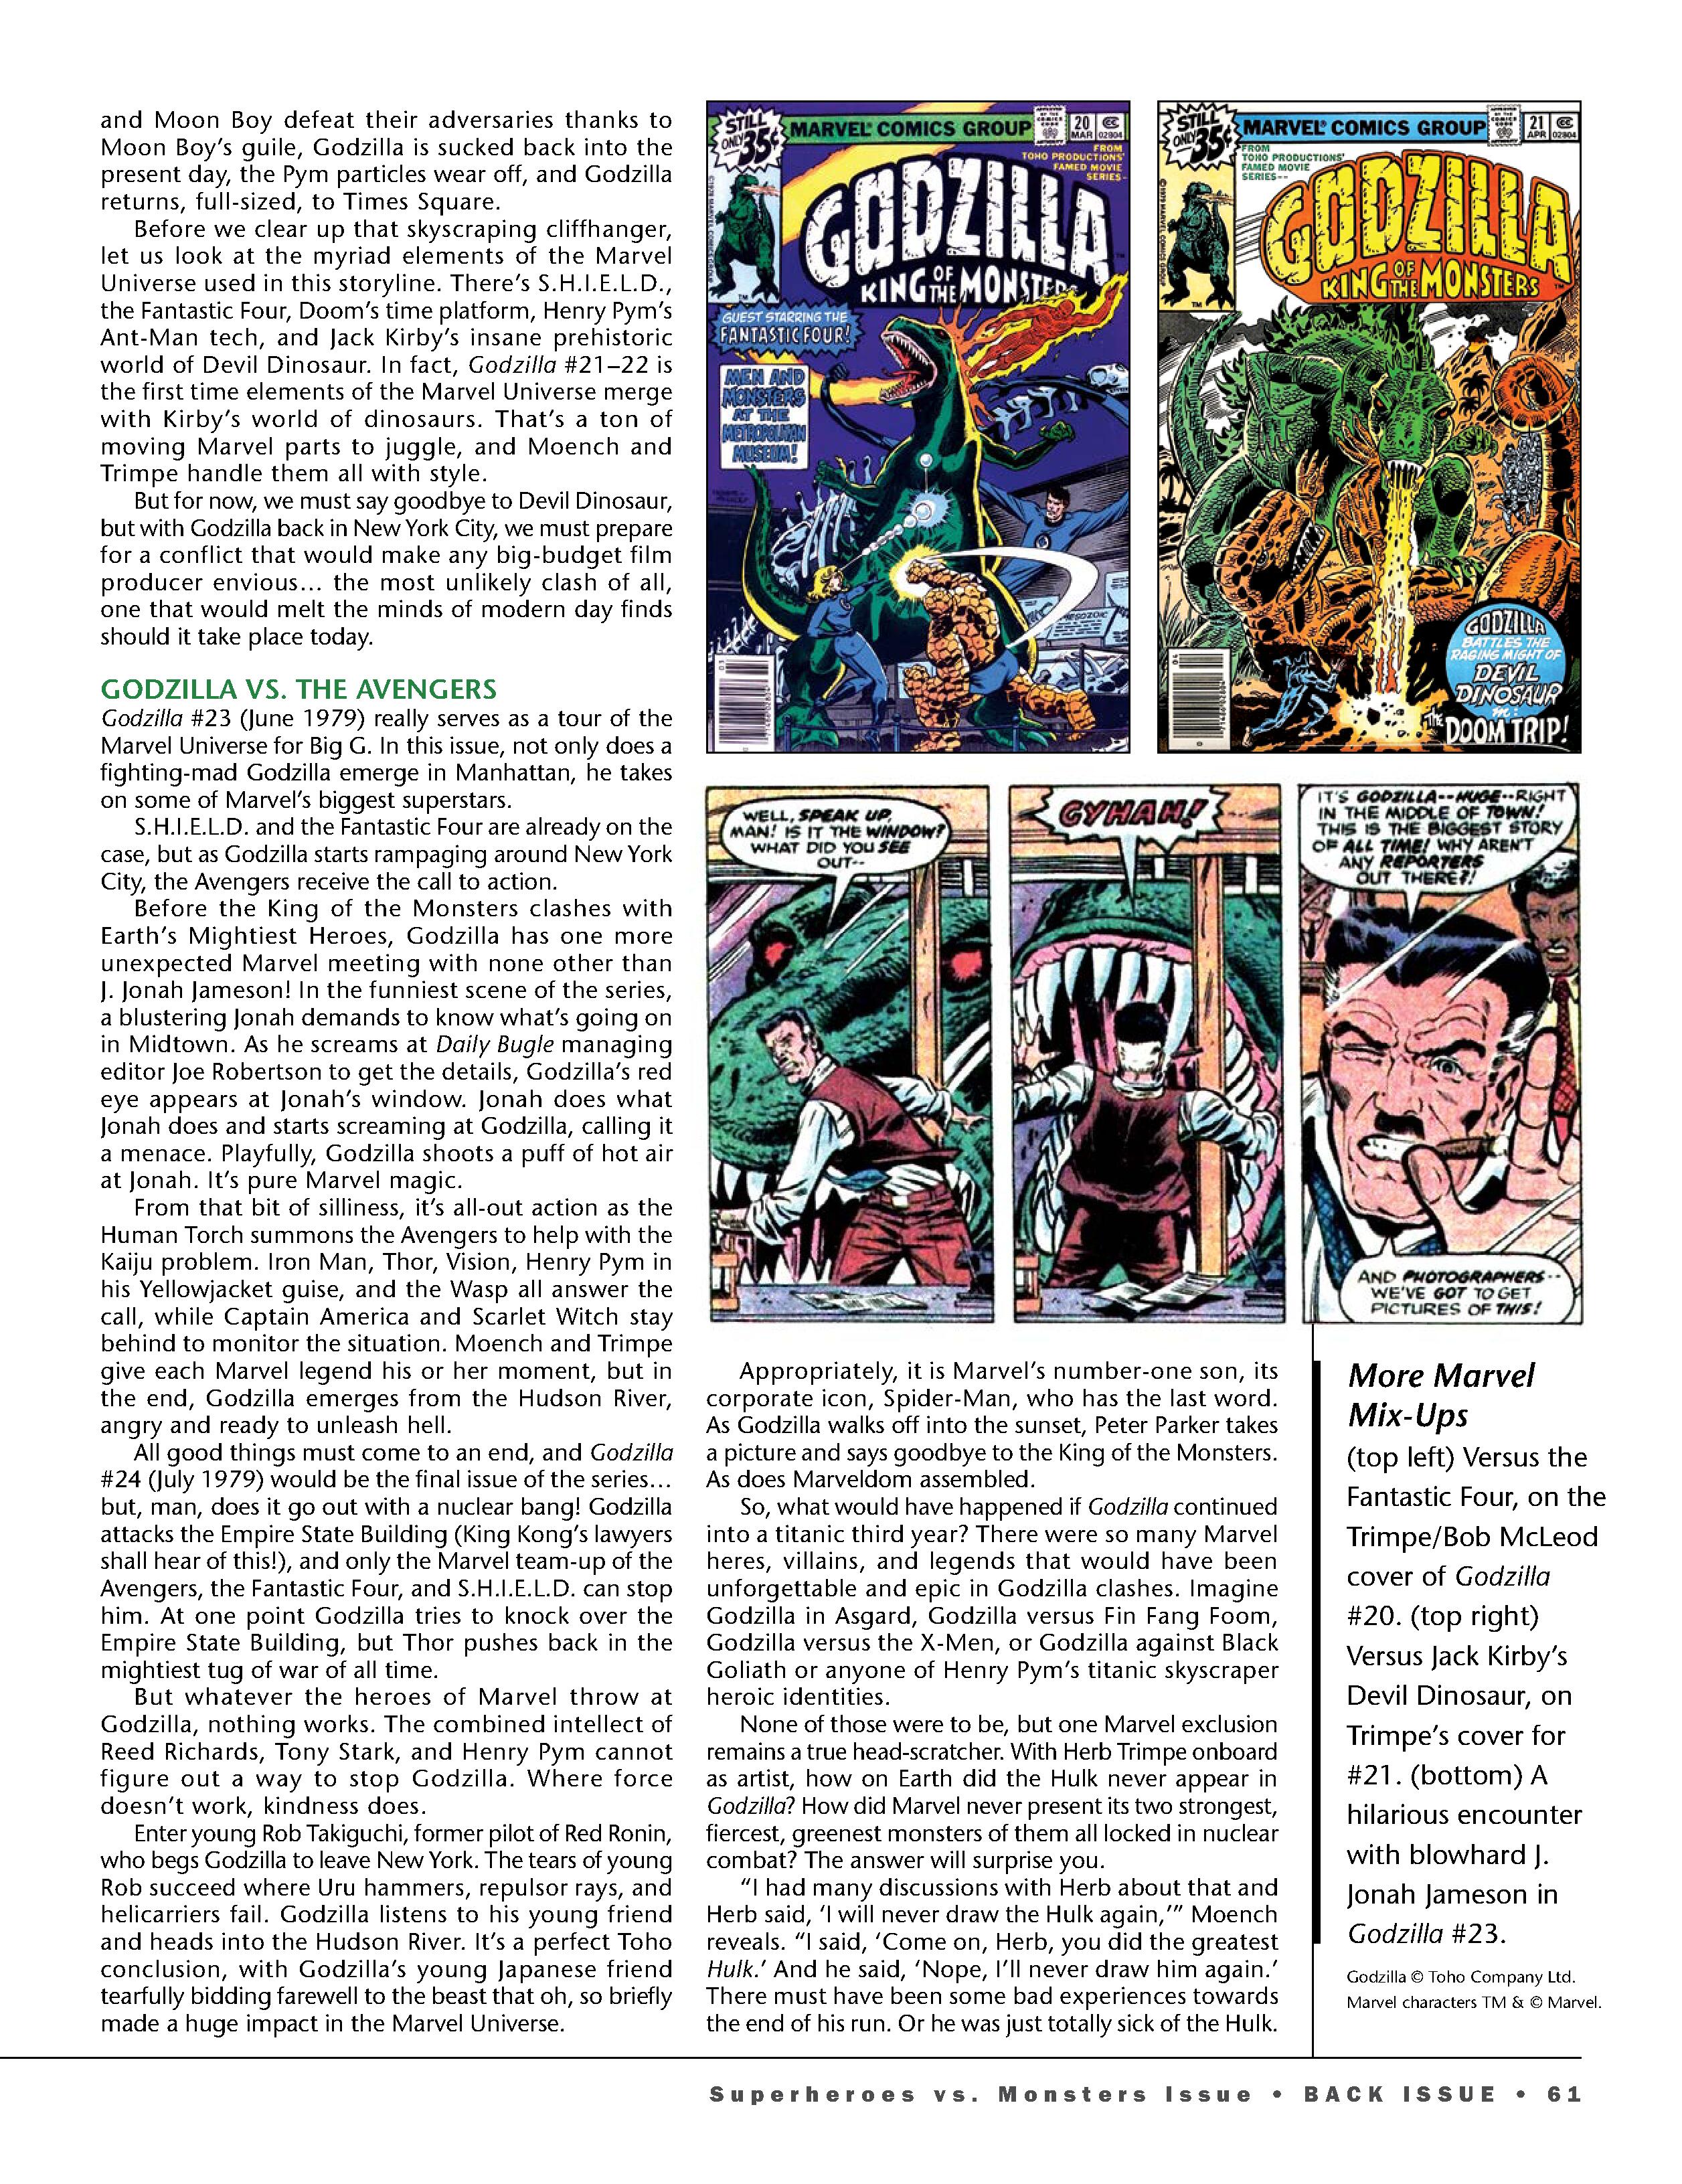 Read online Back Issue comic -  Issue #116 - 63